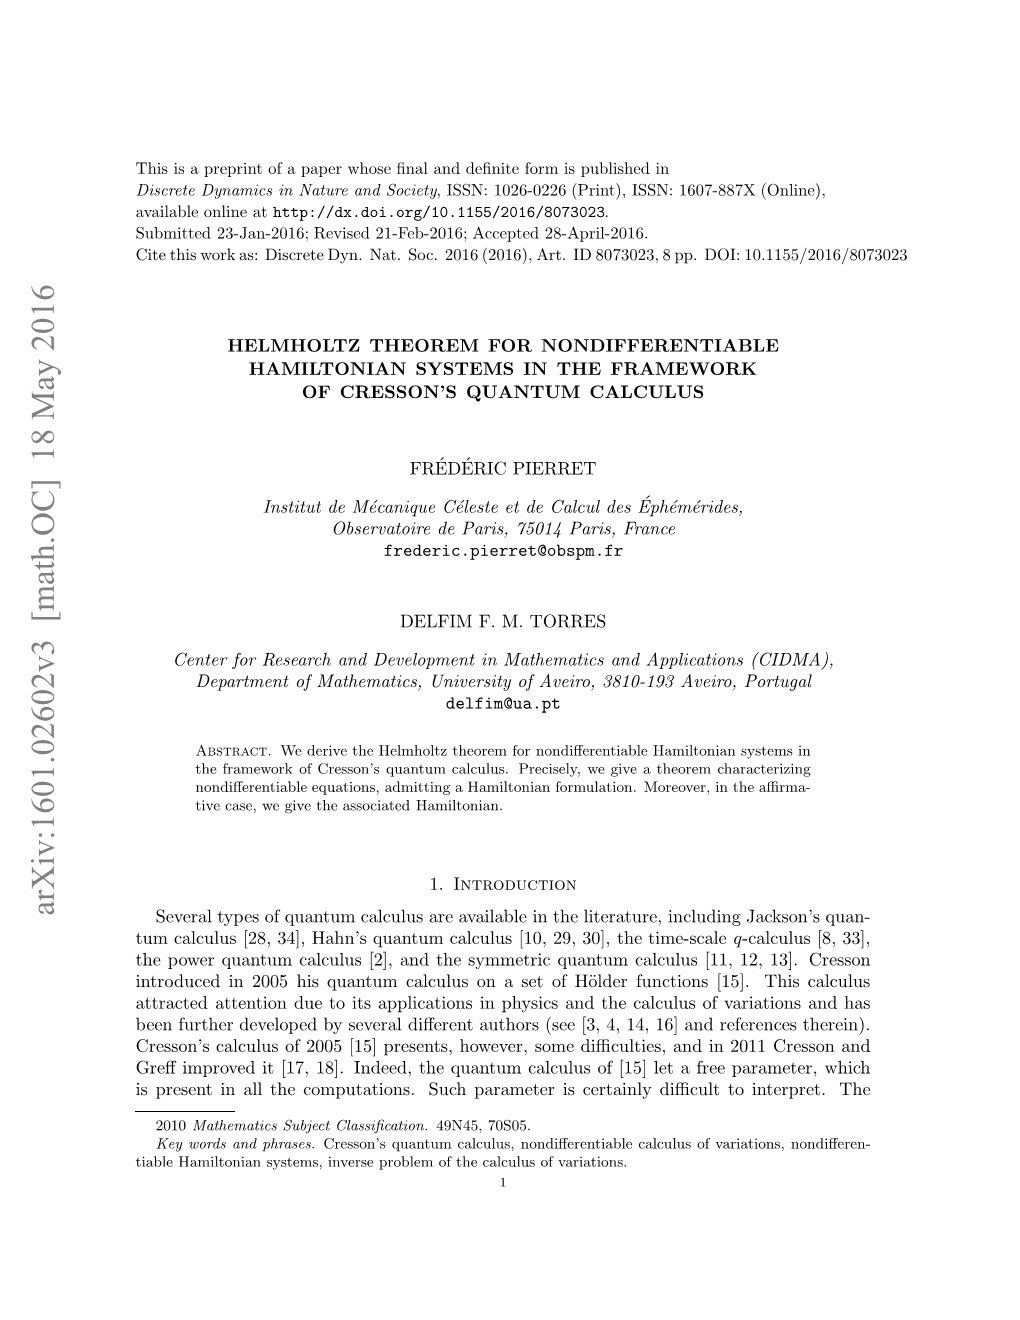 Helmholtz Theorem for Nondifferentiable Hamiltonian Systems 3